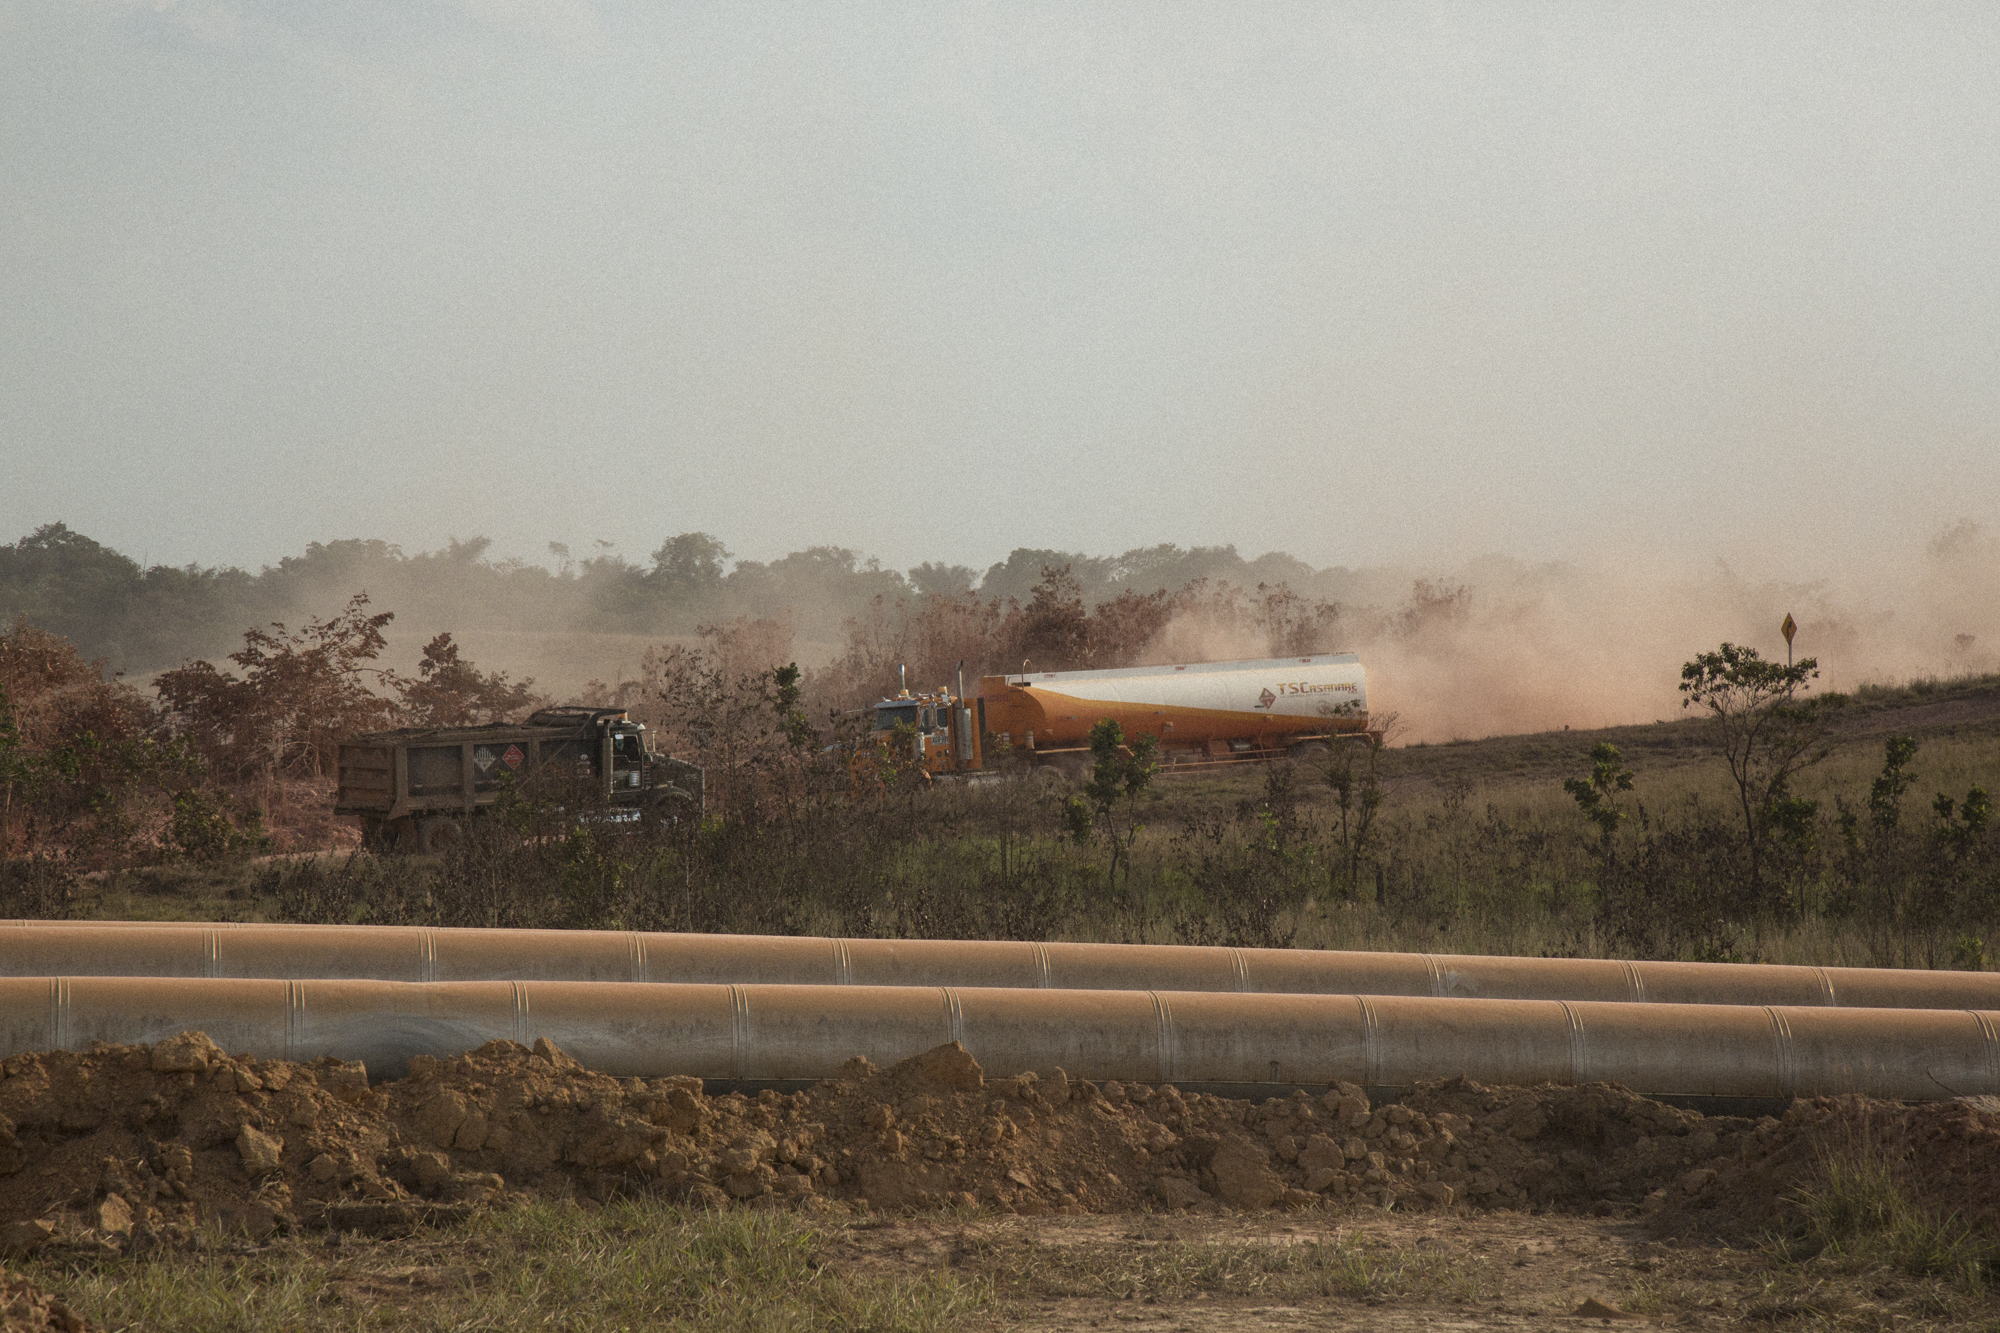  Trucks carrying Ecopetrol oil kick up thick dust through a landscape crisscrossed by pipes carrying oil and water. Locals complain that dust pollution has caused respiratory problems and pollution from noise has affected animals and humans alike. Ap